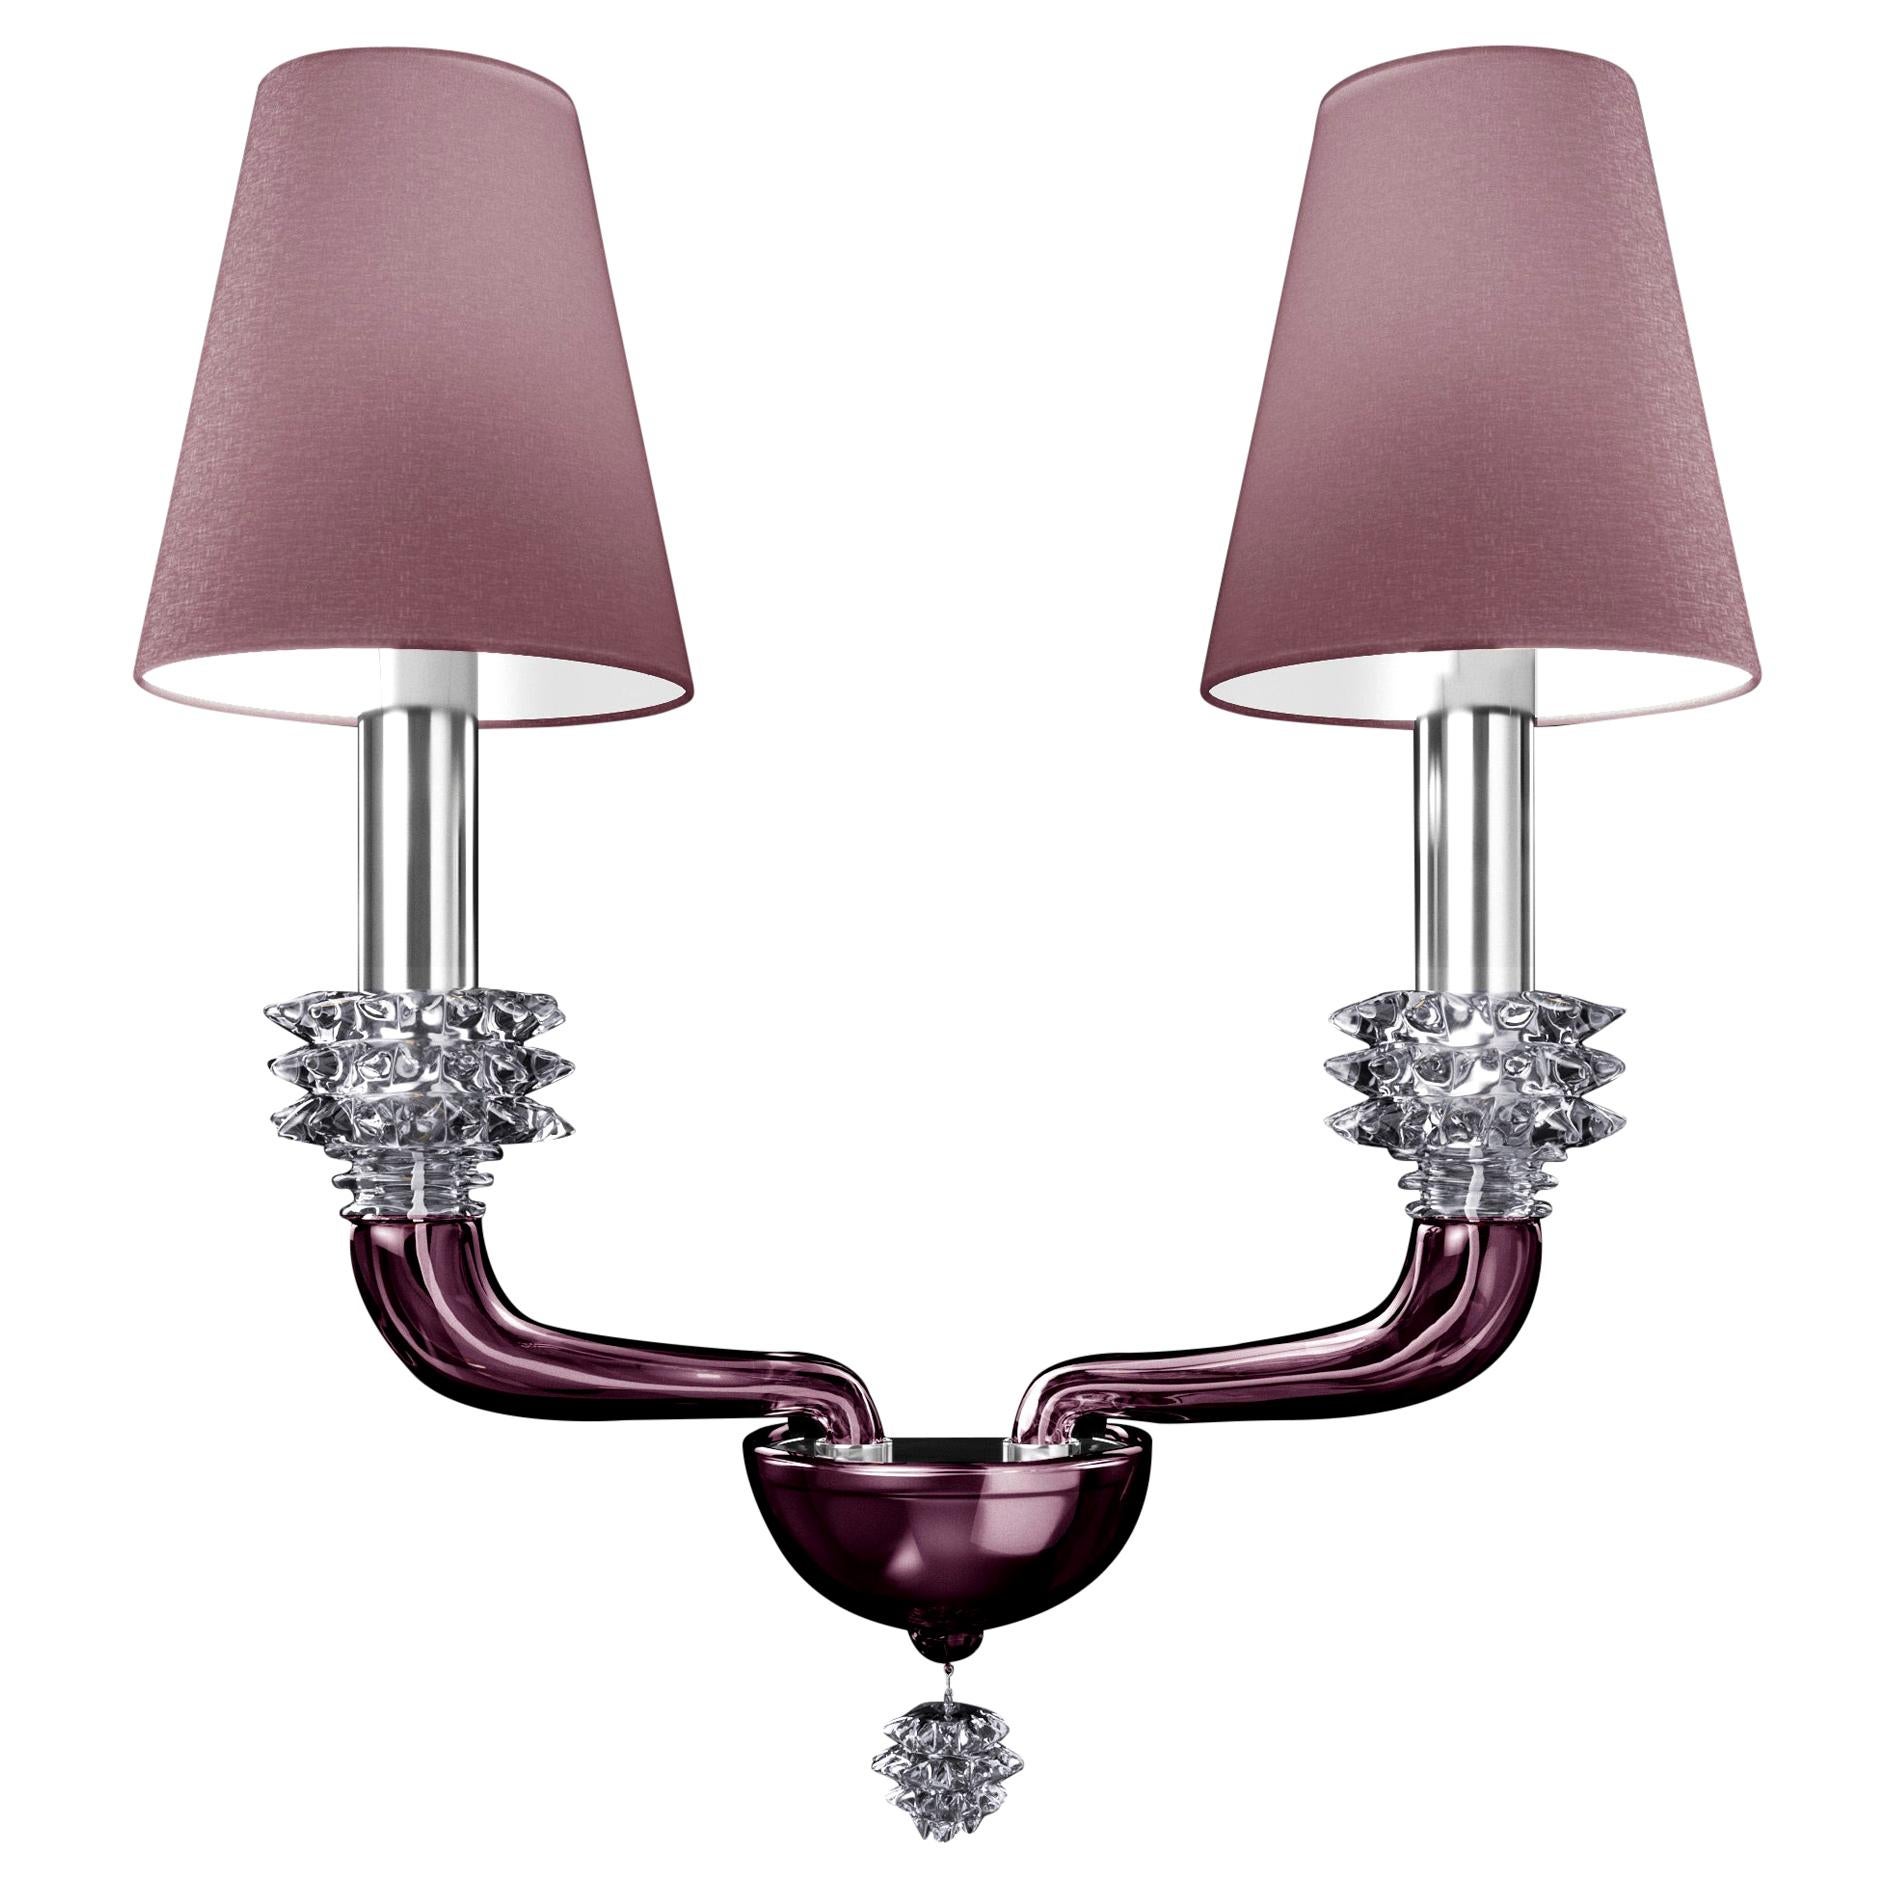 Purple (Violet_VI) Rotterdam 5563 02 Wall Sconce in Glass with Pink Shade, by Barovier&Toso